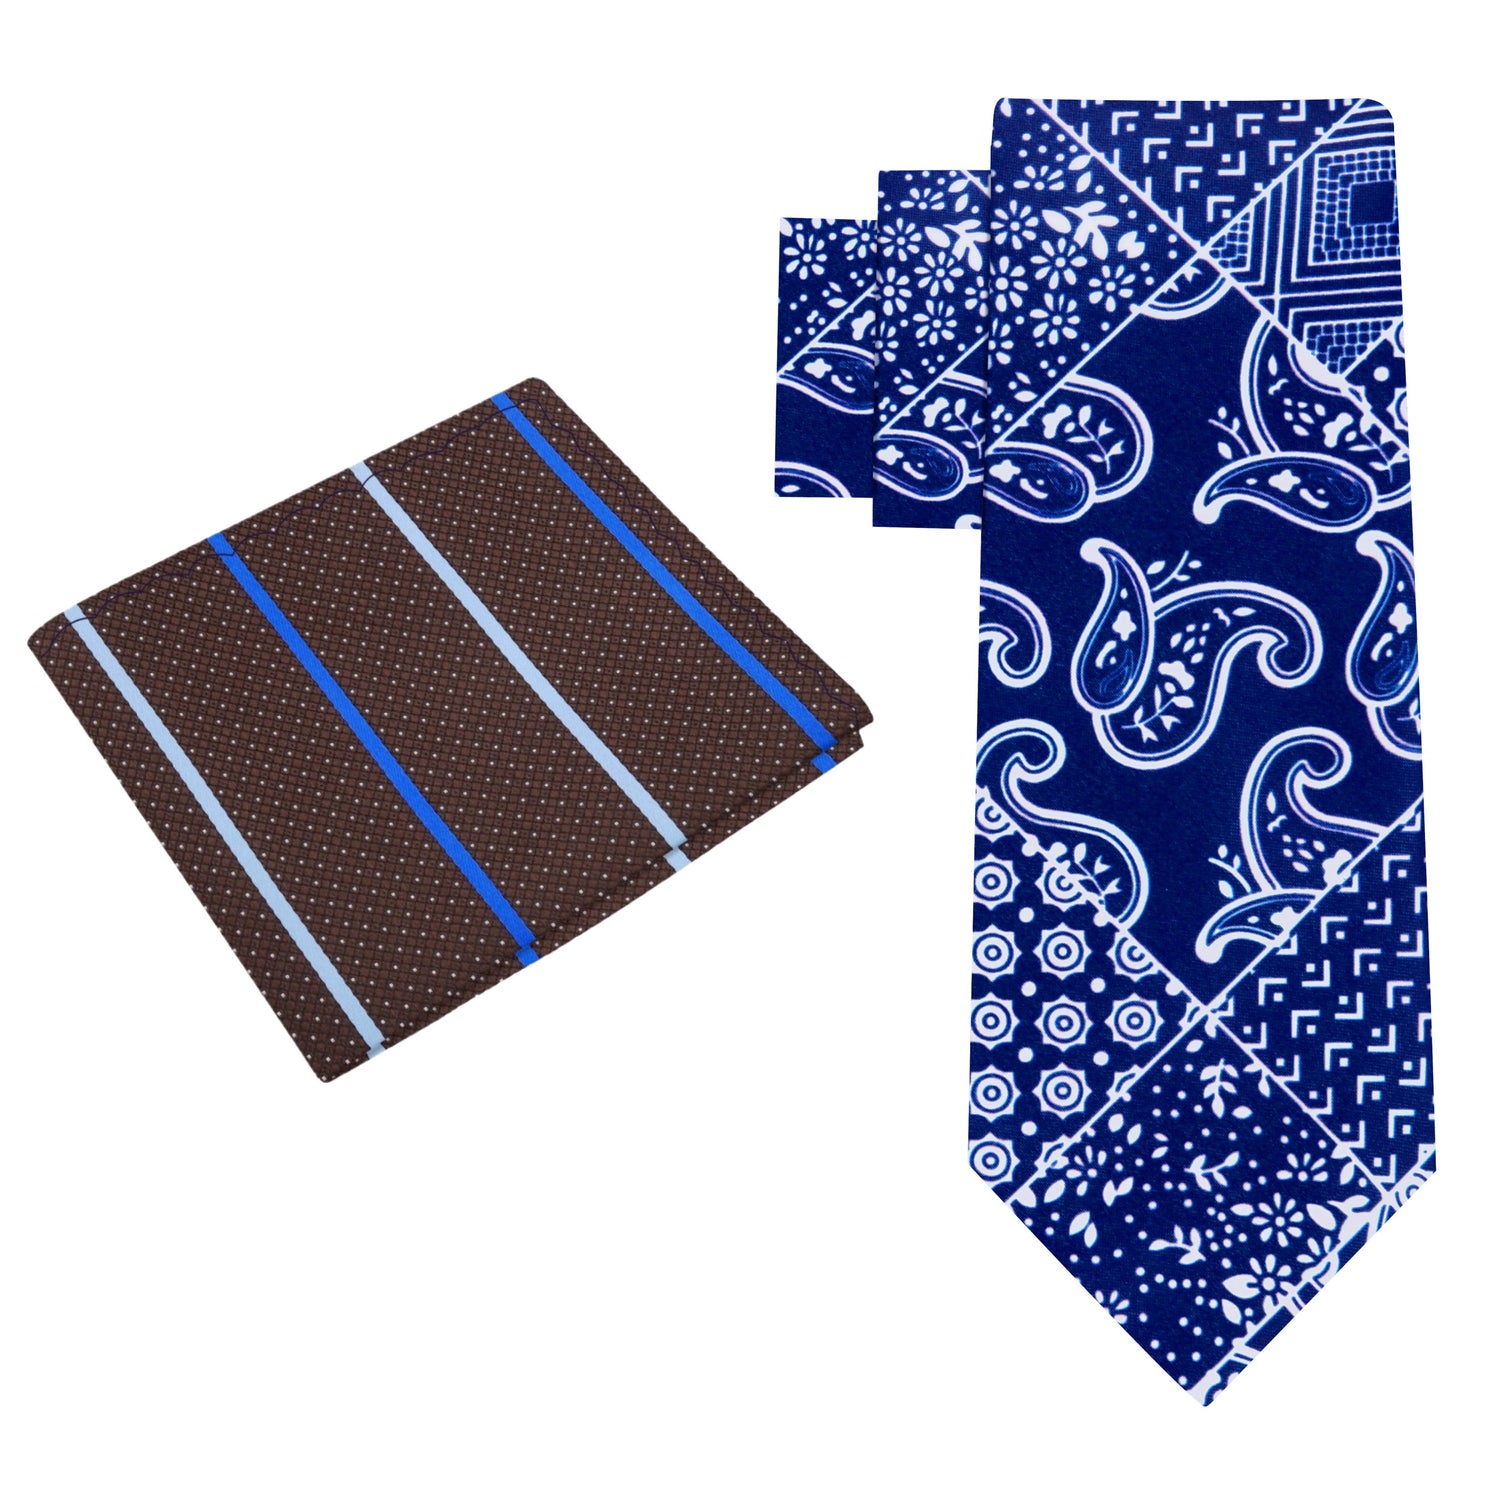 Alt View: Blue and White Paisley Tie with Brown Stripe Square